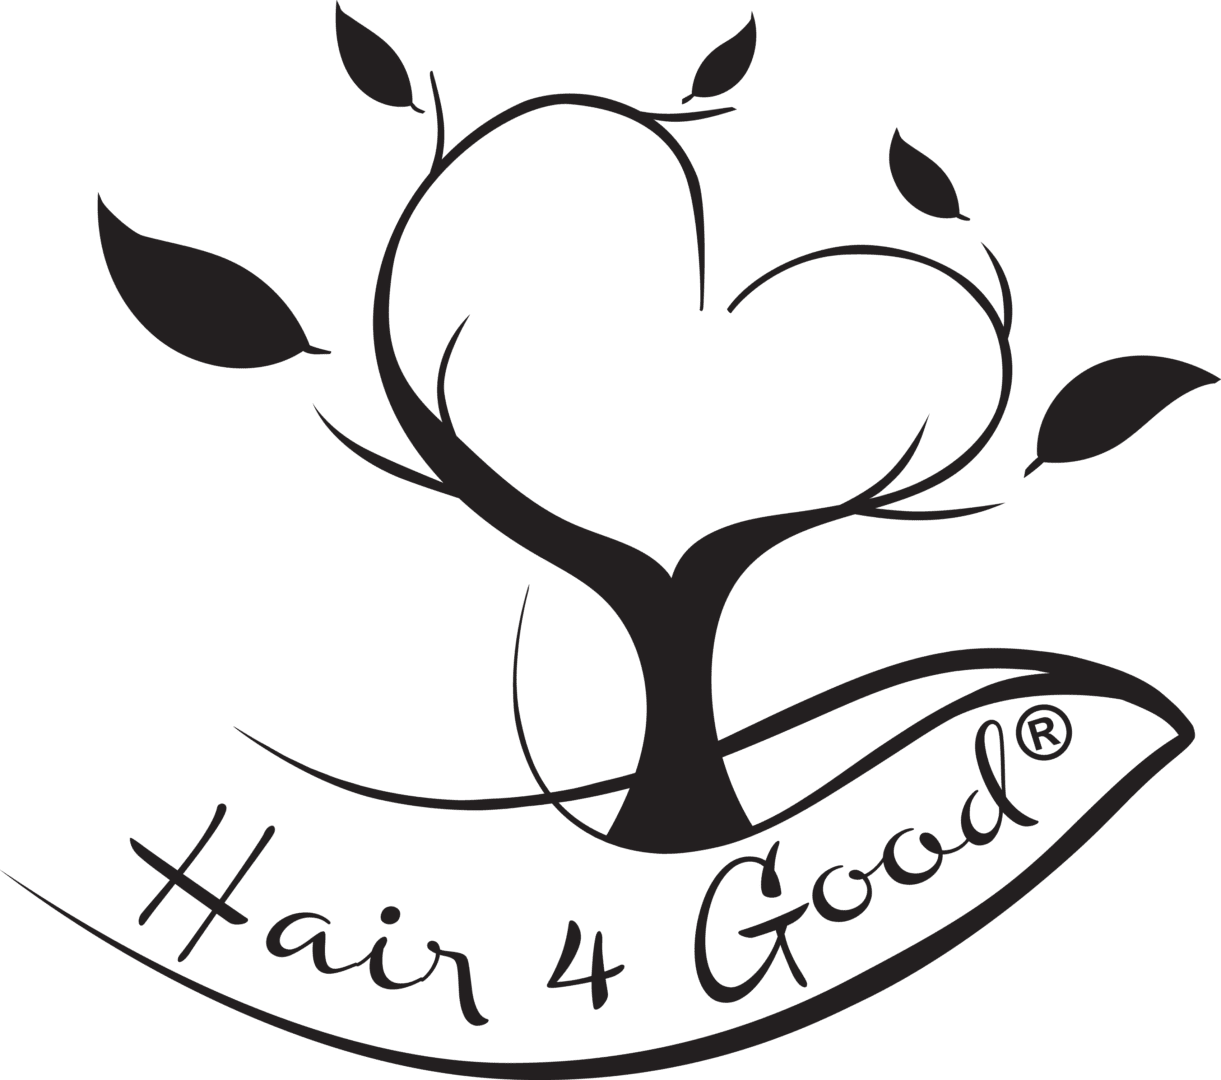 A green background with the words hair 4 good written in black.